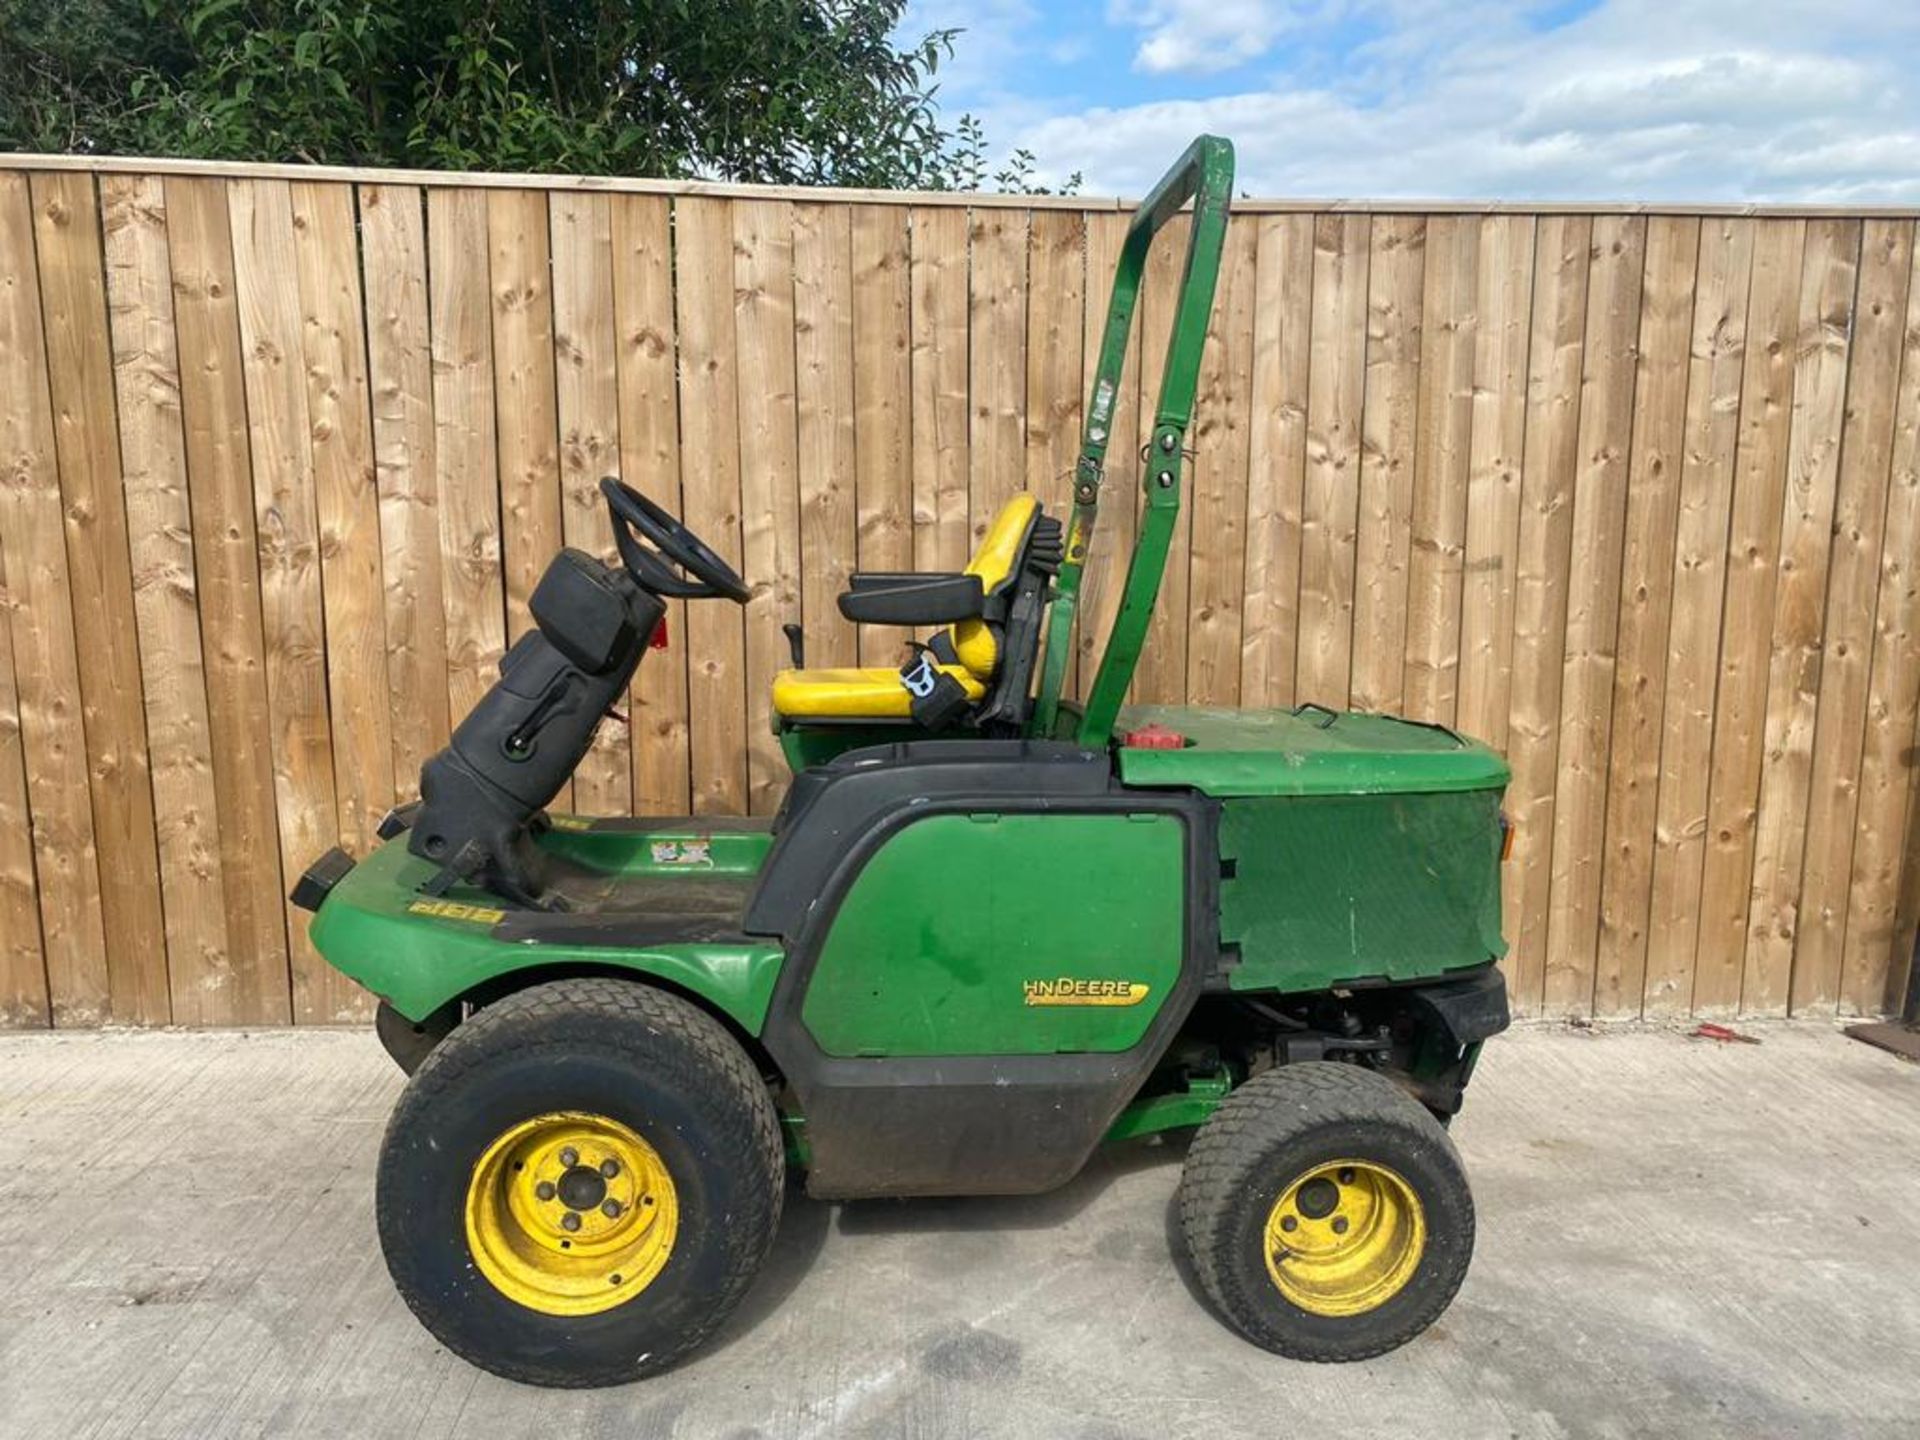 2013 "63" JOHN DEERE 1545 OUTFRONT MOWER LOCATION: NORTH YORKSHIRE - Image 2 of 8